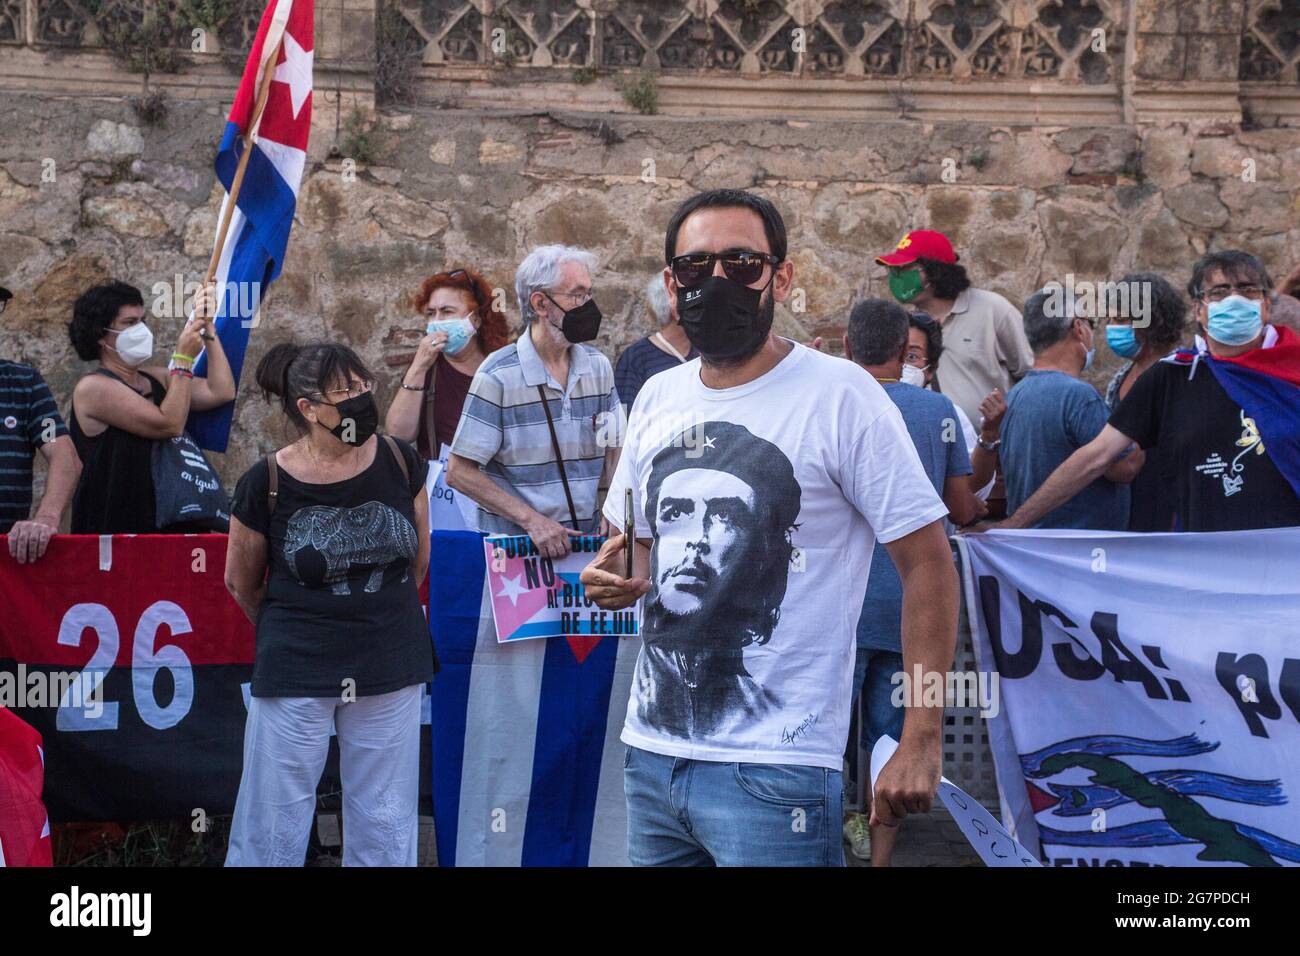 Barcelona, Spain. 15th July, 2021. A protester wearing a shirt with the face of Ernesto Che Guevara takes part during the demonstration.About a hundred people have demonstrated against the United States blockade against Cuba in front of the US consulate in Barcelona. (Photo by Thiago Prudencio/SOPA Images/Sipa USA) Credit: Sipa USA/Alamy Live News Stock Photo